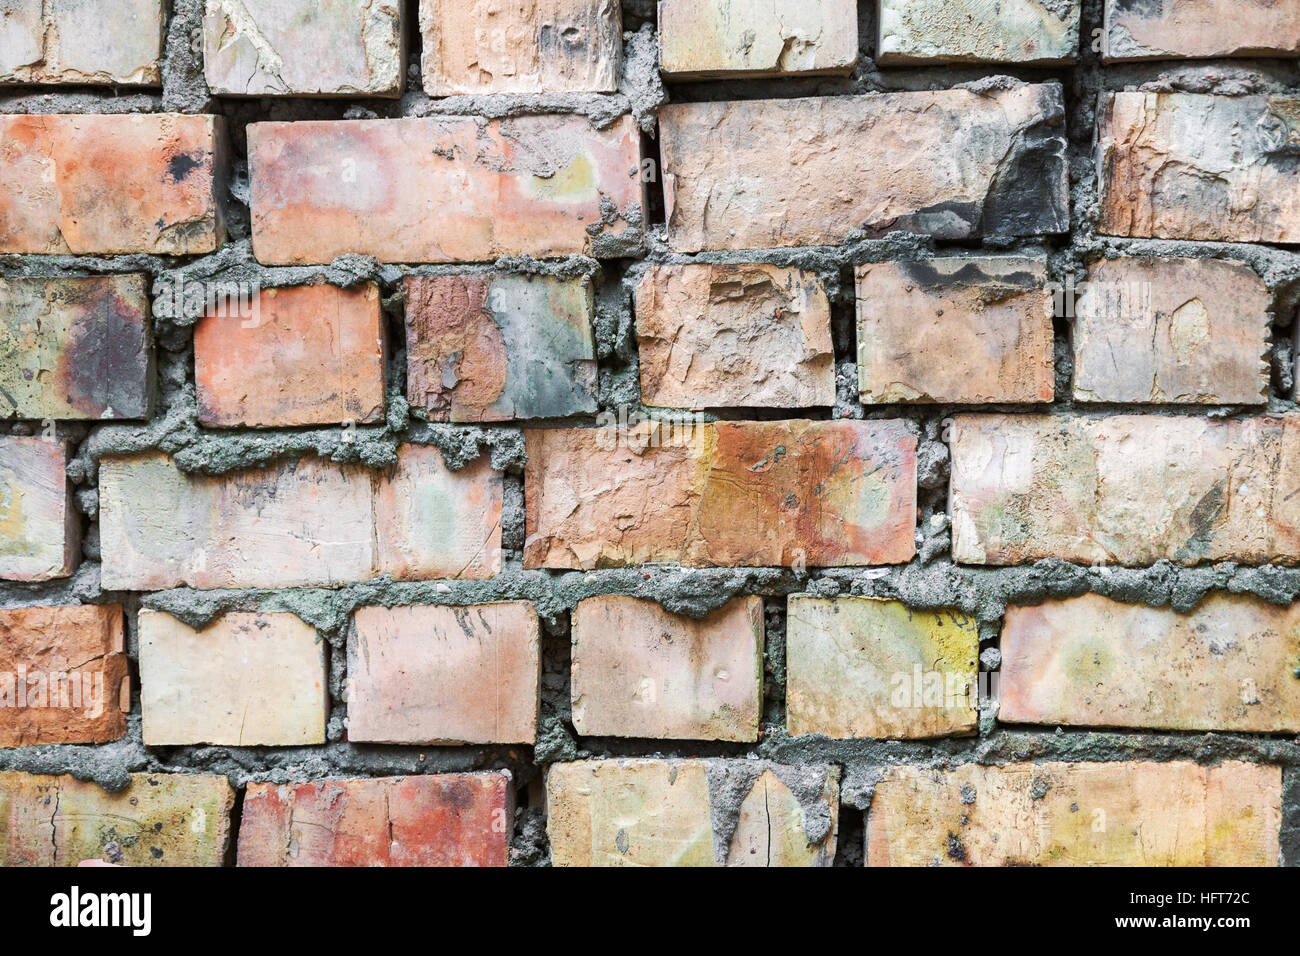 Dirty abandoned old brick wall background Stock Photo